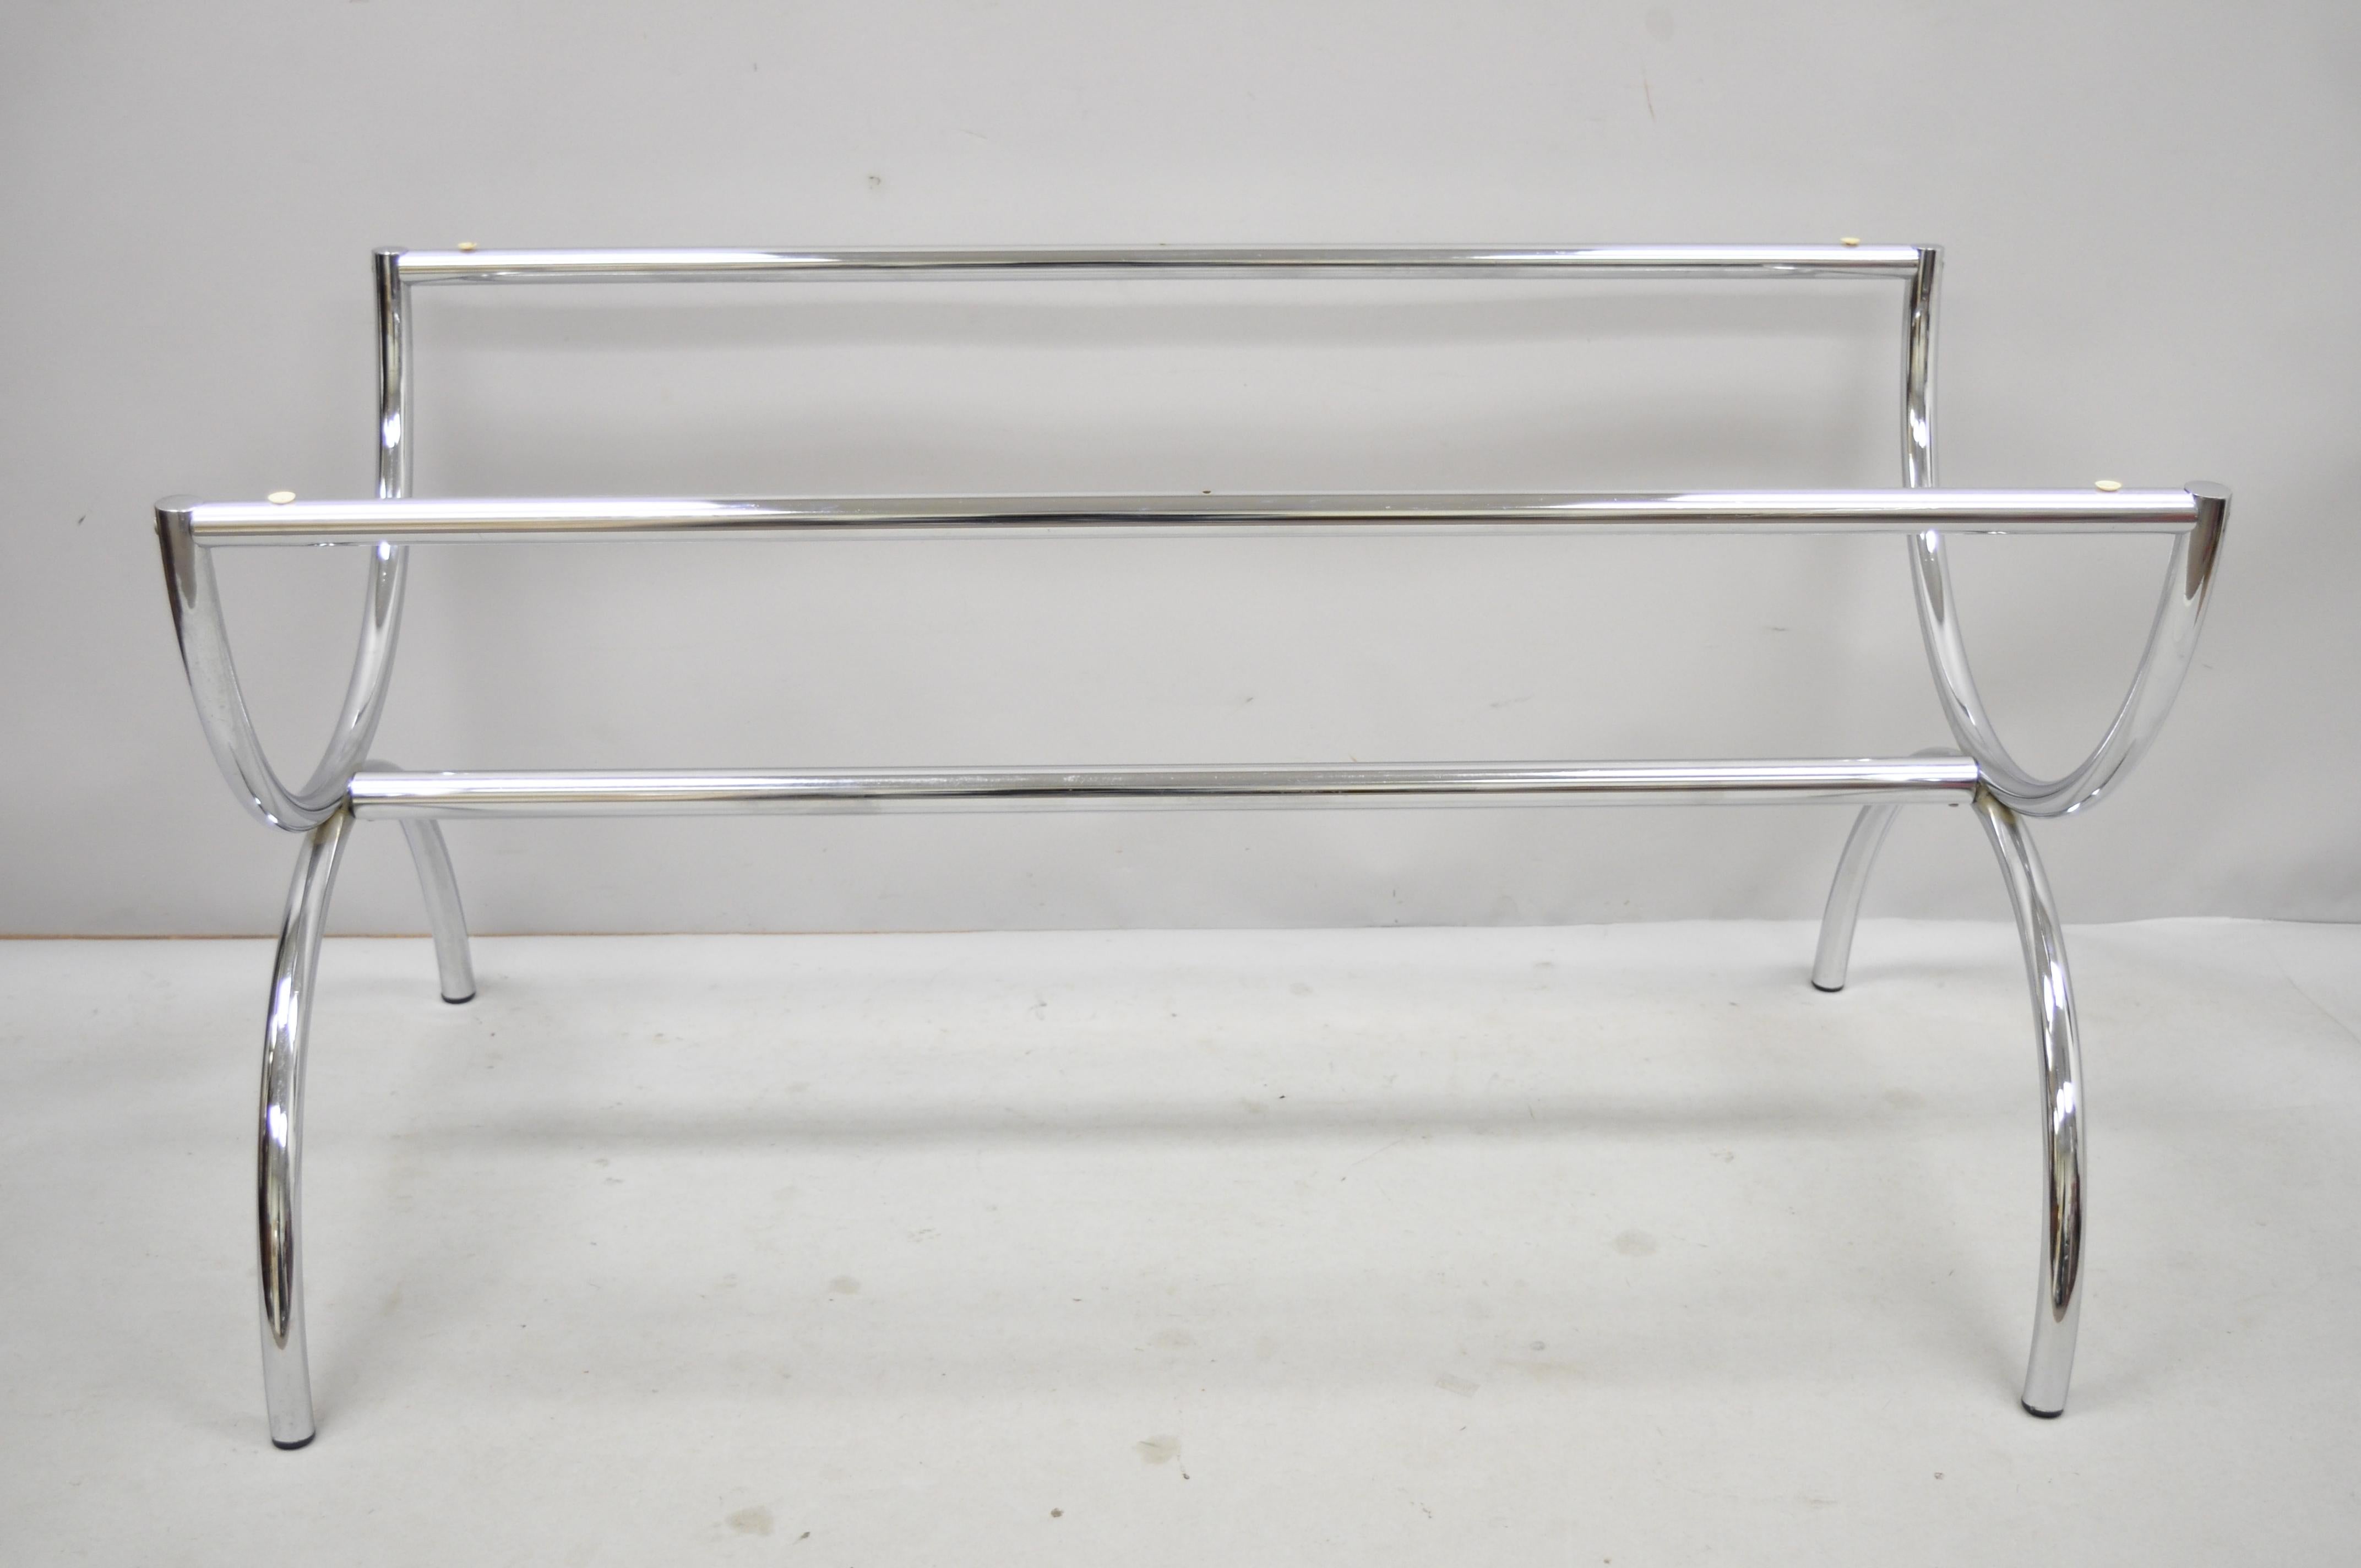 Vintage Mid-Century Modern chrome Milo Baughman style dining table desk base. Item includes a polished chrome frame, X-form sides stretcher base, sleek sculptural form. Base only. Does not include glass top, circa mid-late 20th century.